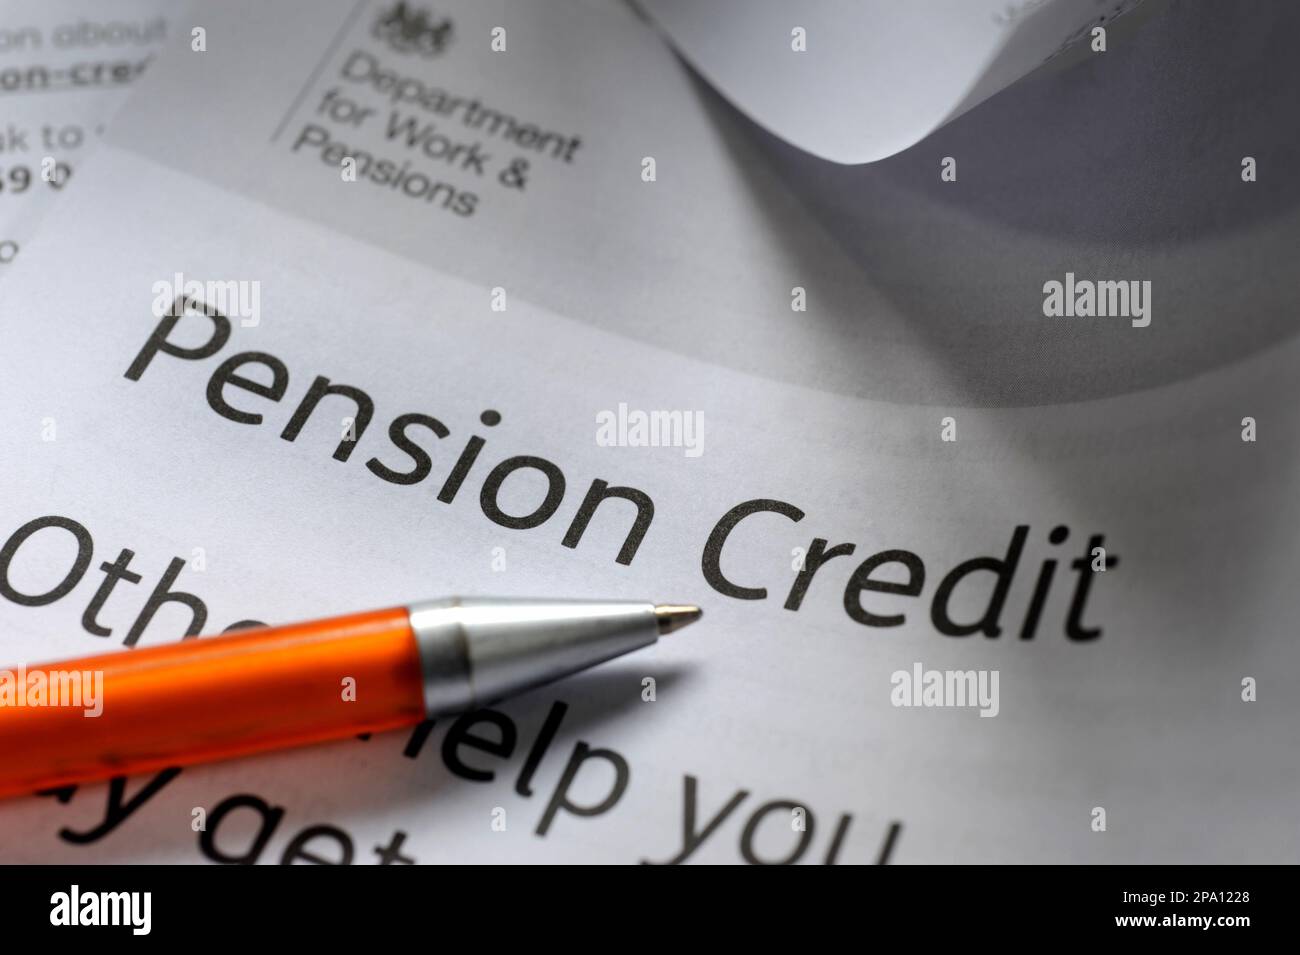 GOVERNMENT PENSION CREDIT INFORMATION LEAFLET AND PEN RE STATE PENSIONS BENEFITS INCOMES PENSIONERS ETC UK Stock Photo